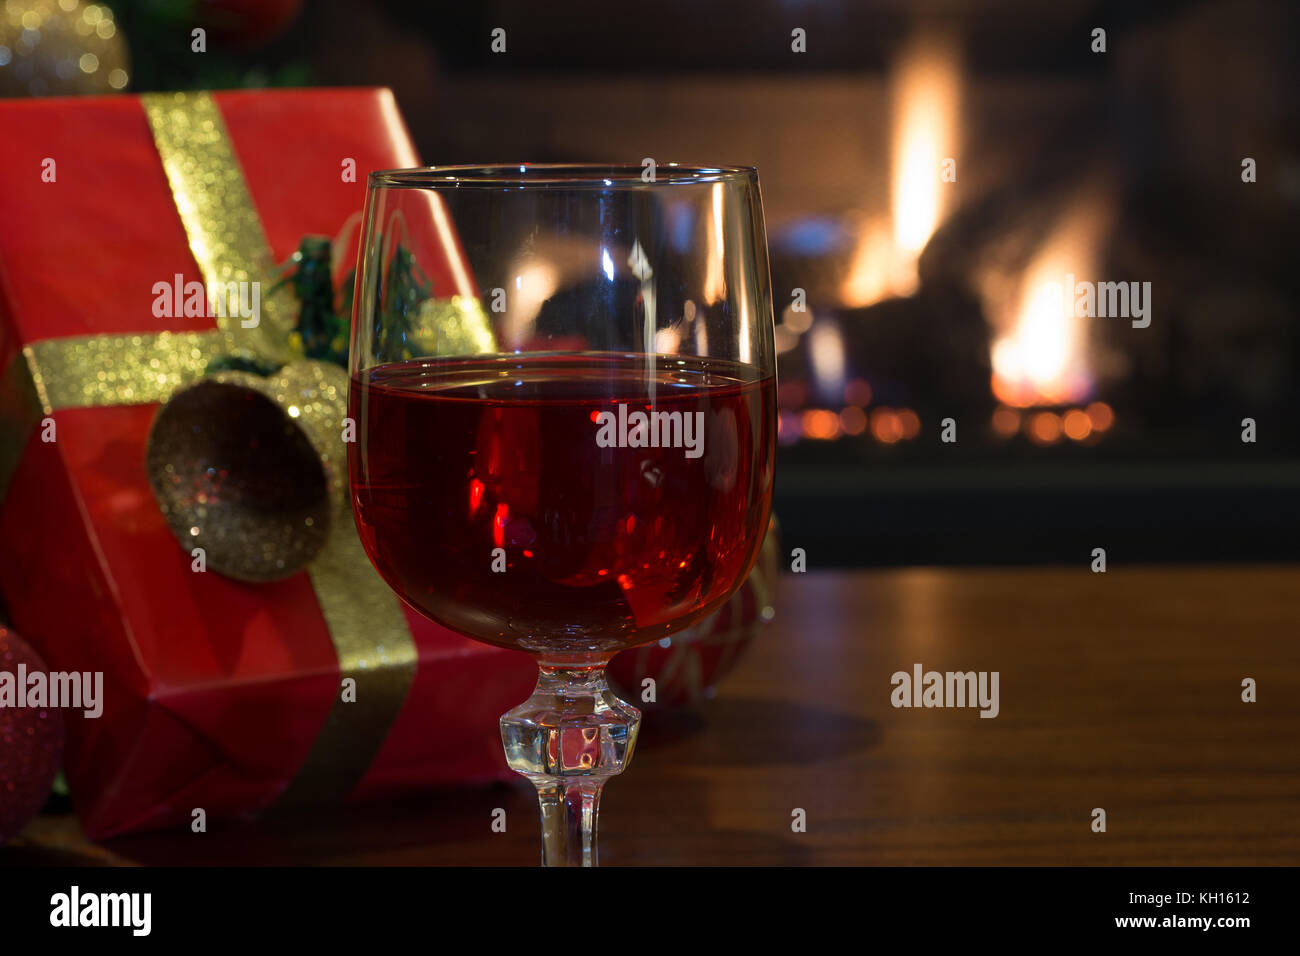 Mulled wine glasses on table in front of burning fireplace. Stock